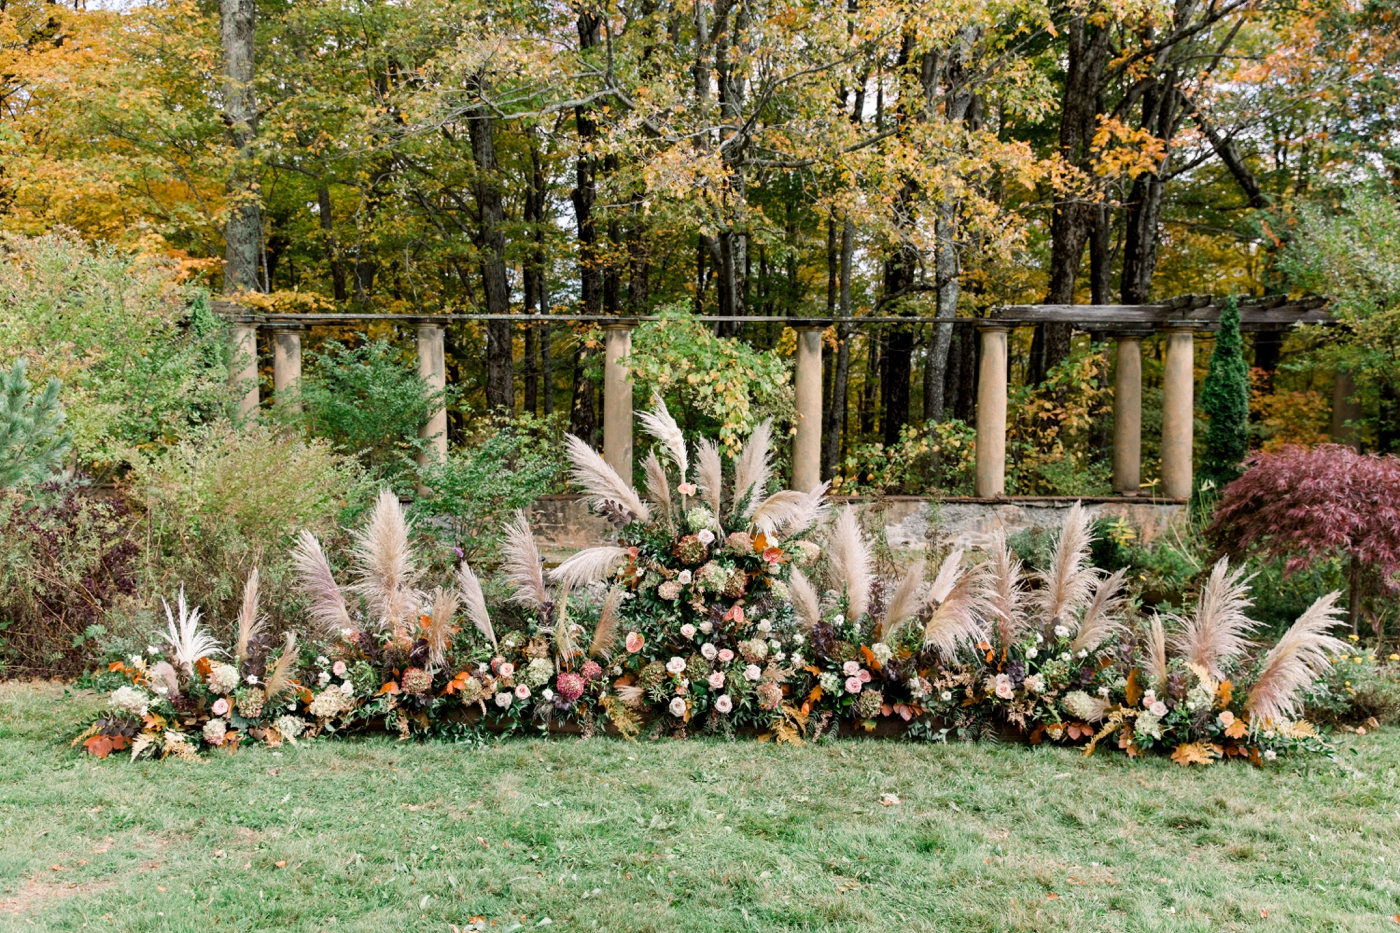 Classic, Elegant Wedding - Fall wedding at Aldworth Manor in New Hampshire by Events By Sorrell